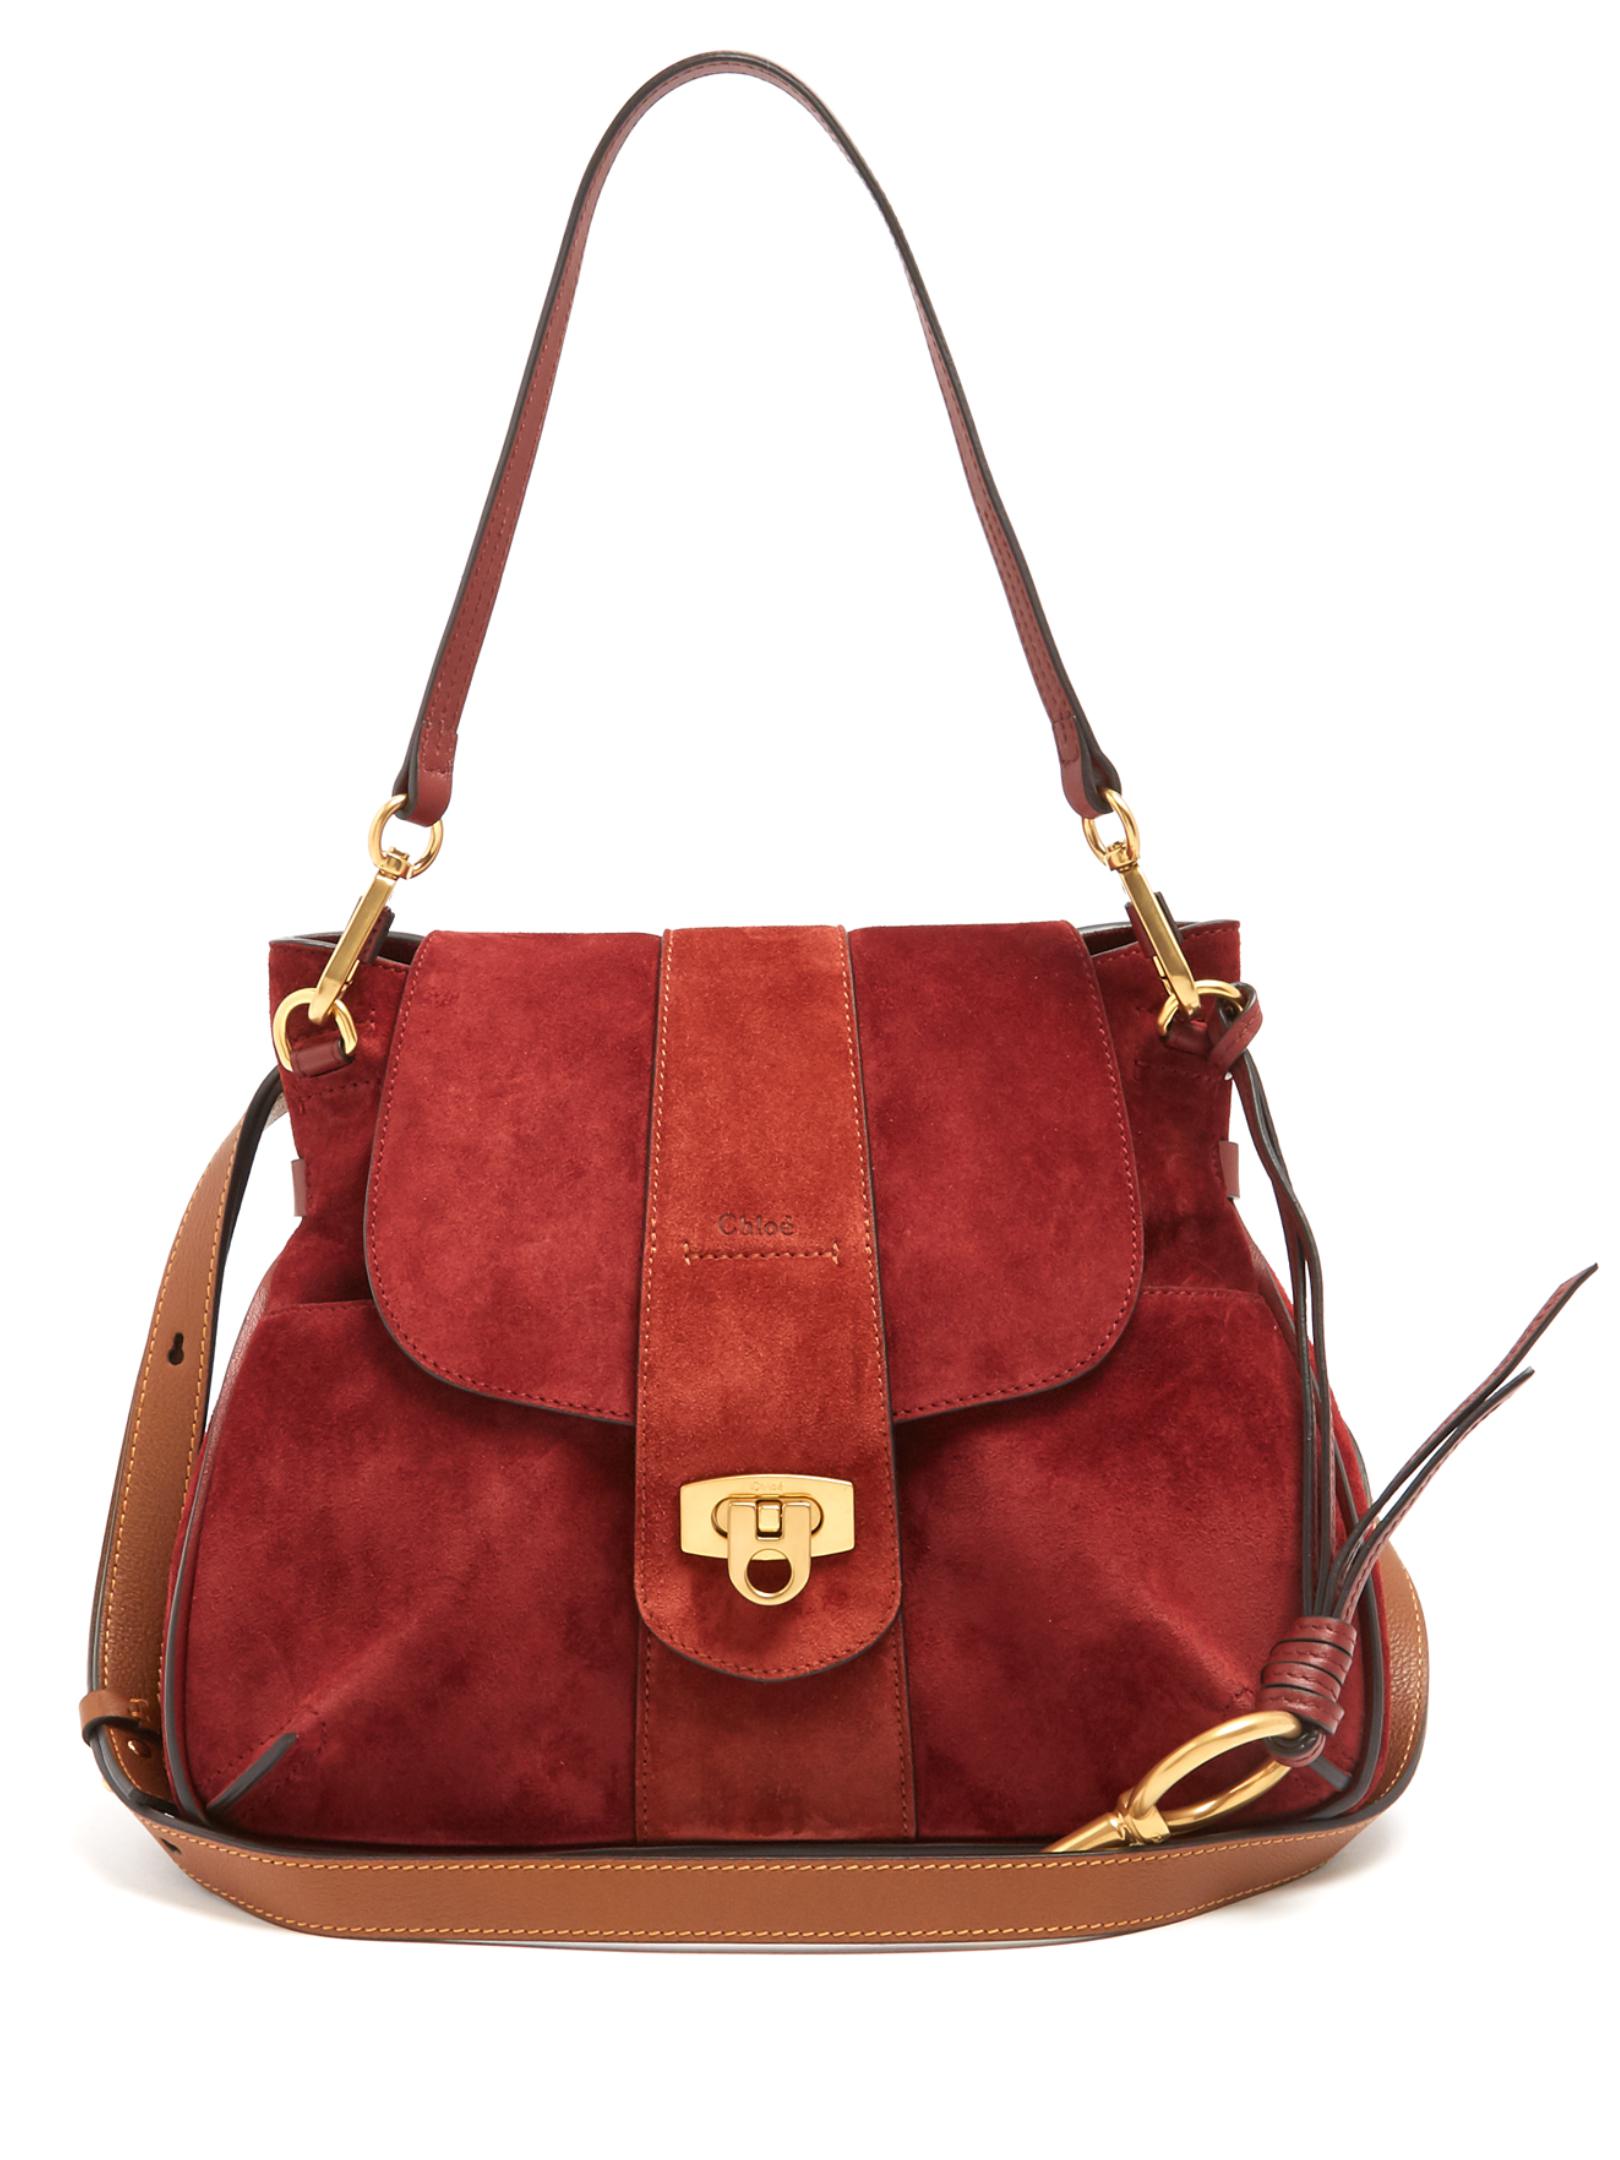 Chloé Lexa Small Suede Shoulder Bag in Dark Red (Red) - Lyst